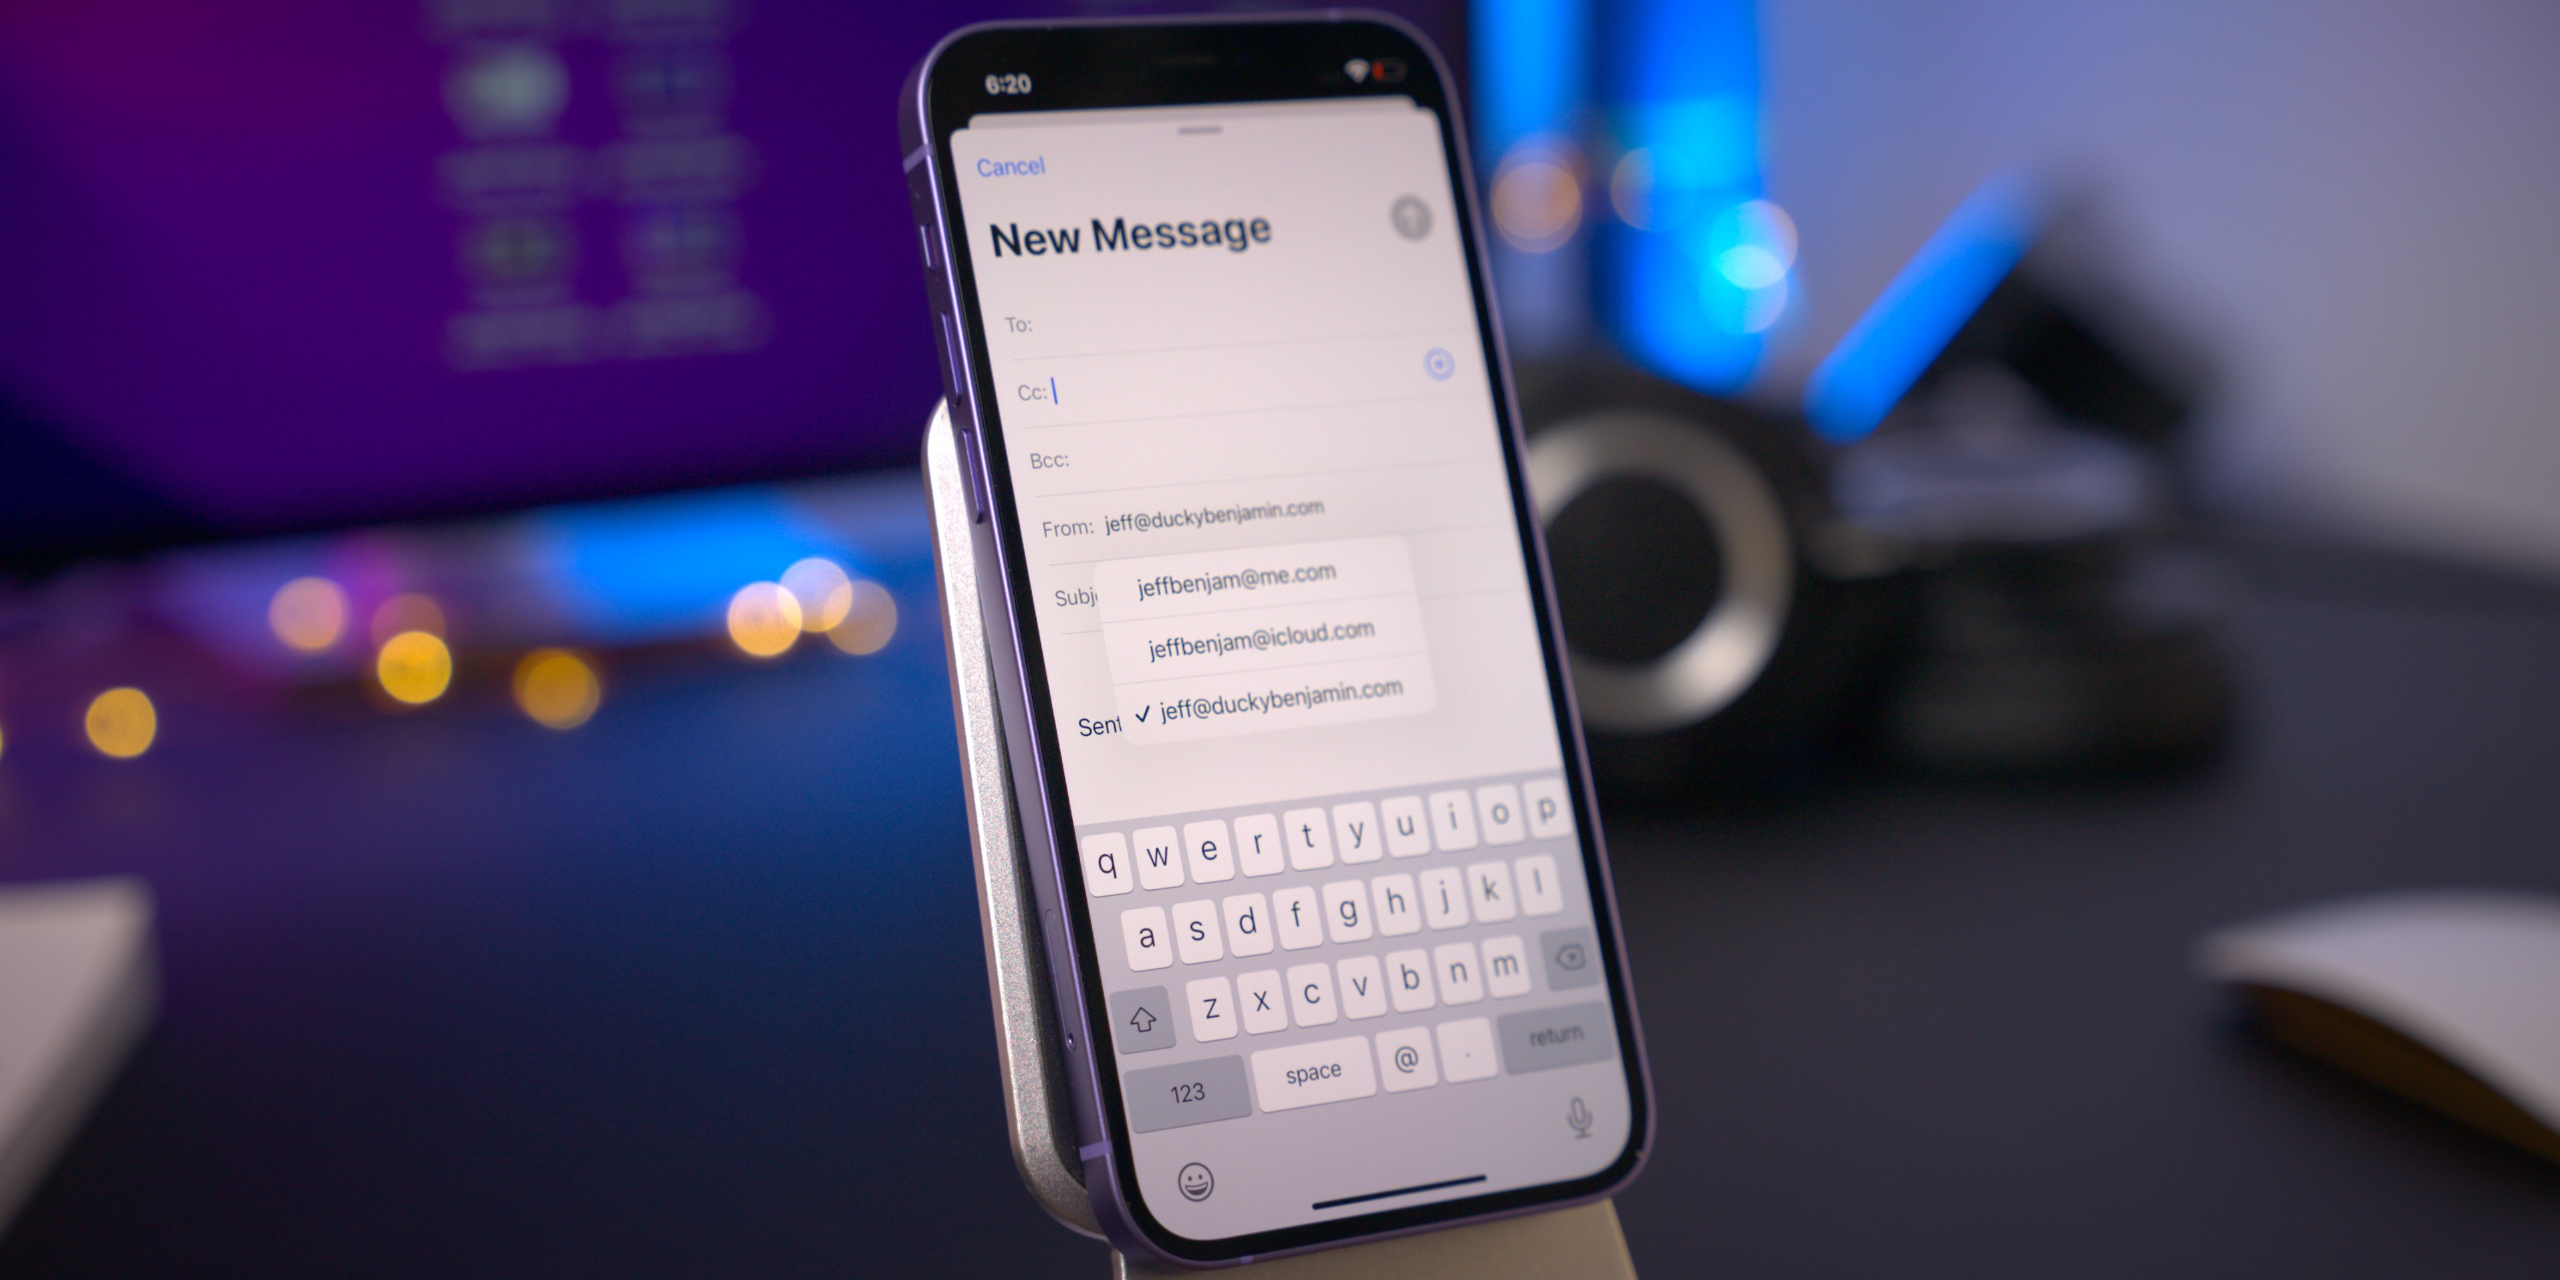 Personalize iCloud Mail: How to Buy a Custom Email Domain in iOS